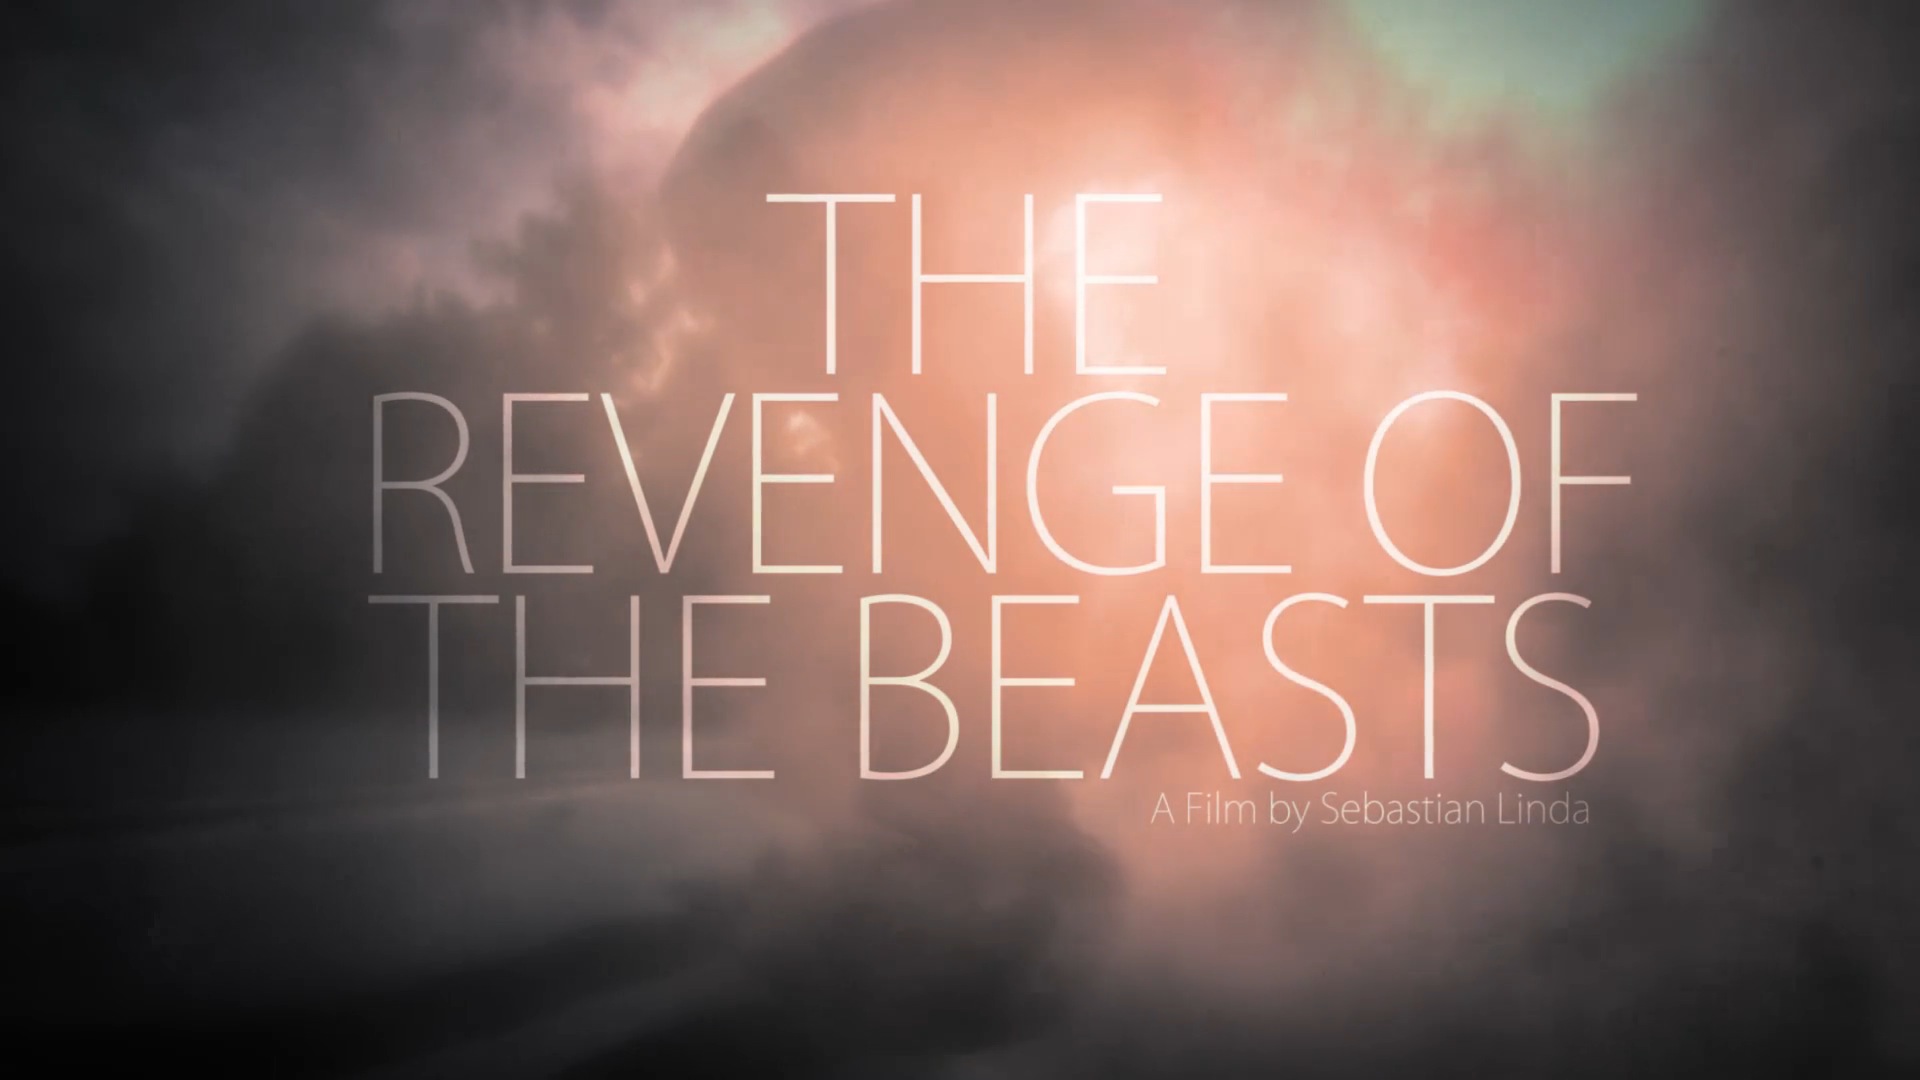 The Revenge of the Beasts7